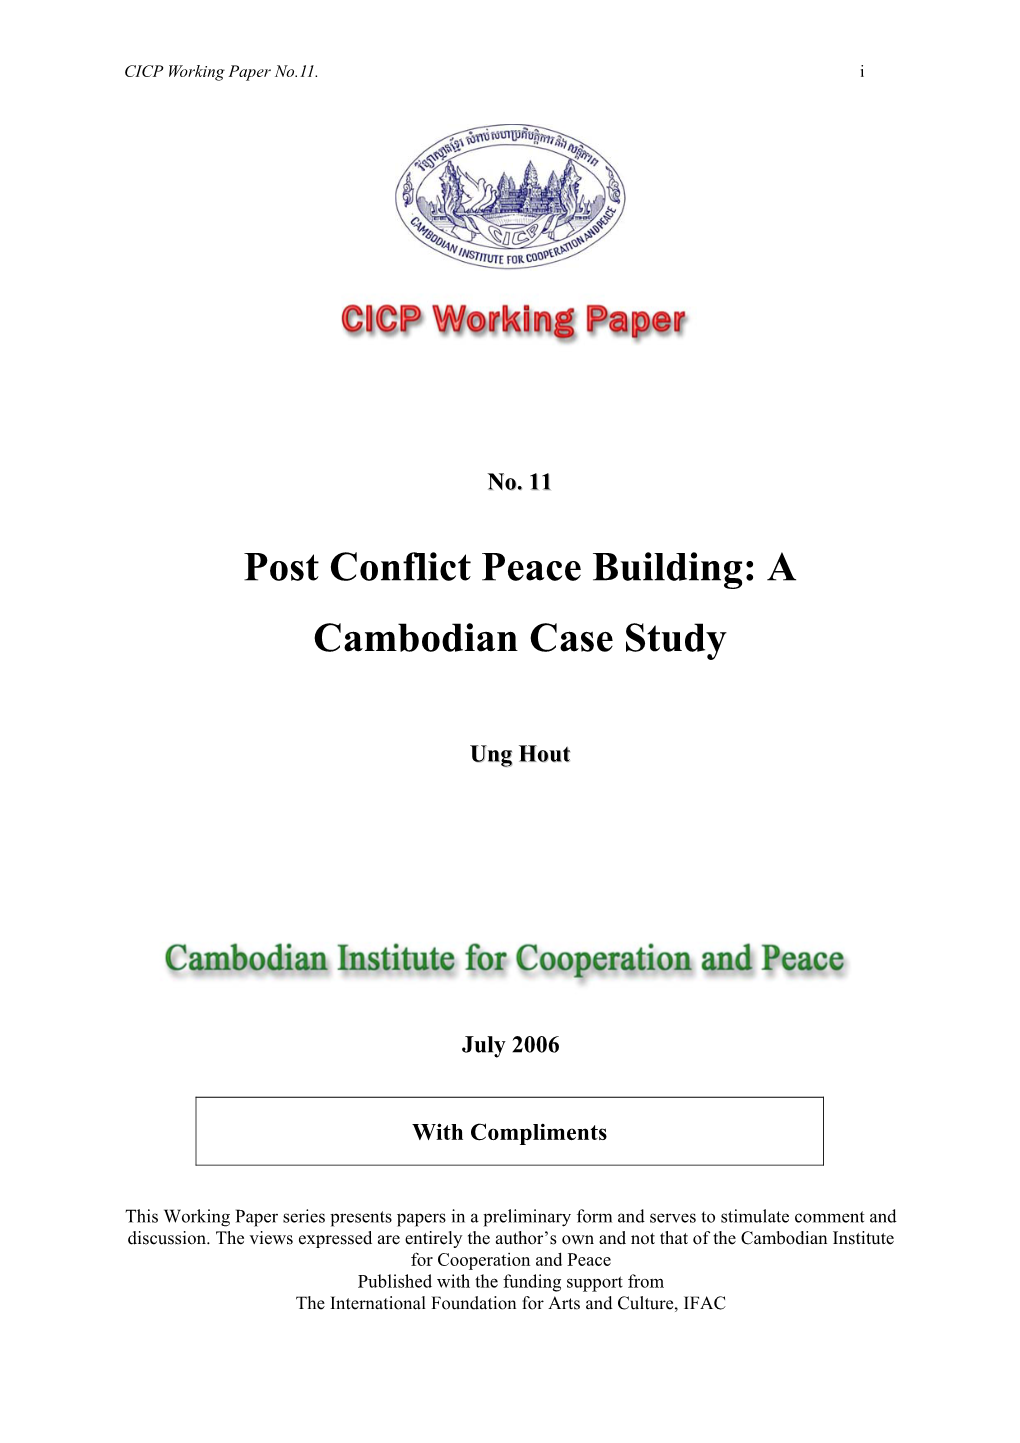 CICP Working Paper No.11: Post Conflict Peace Building by Ung Hout